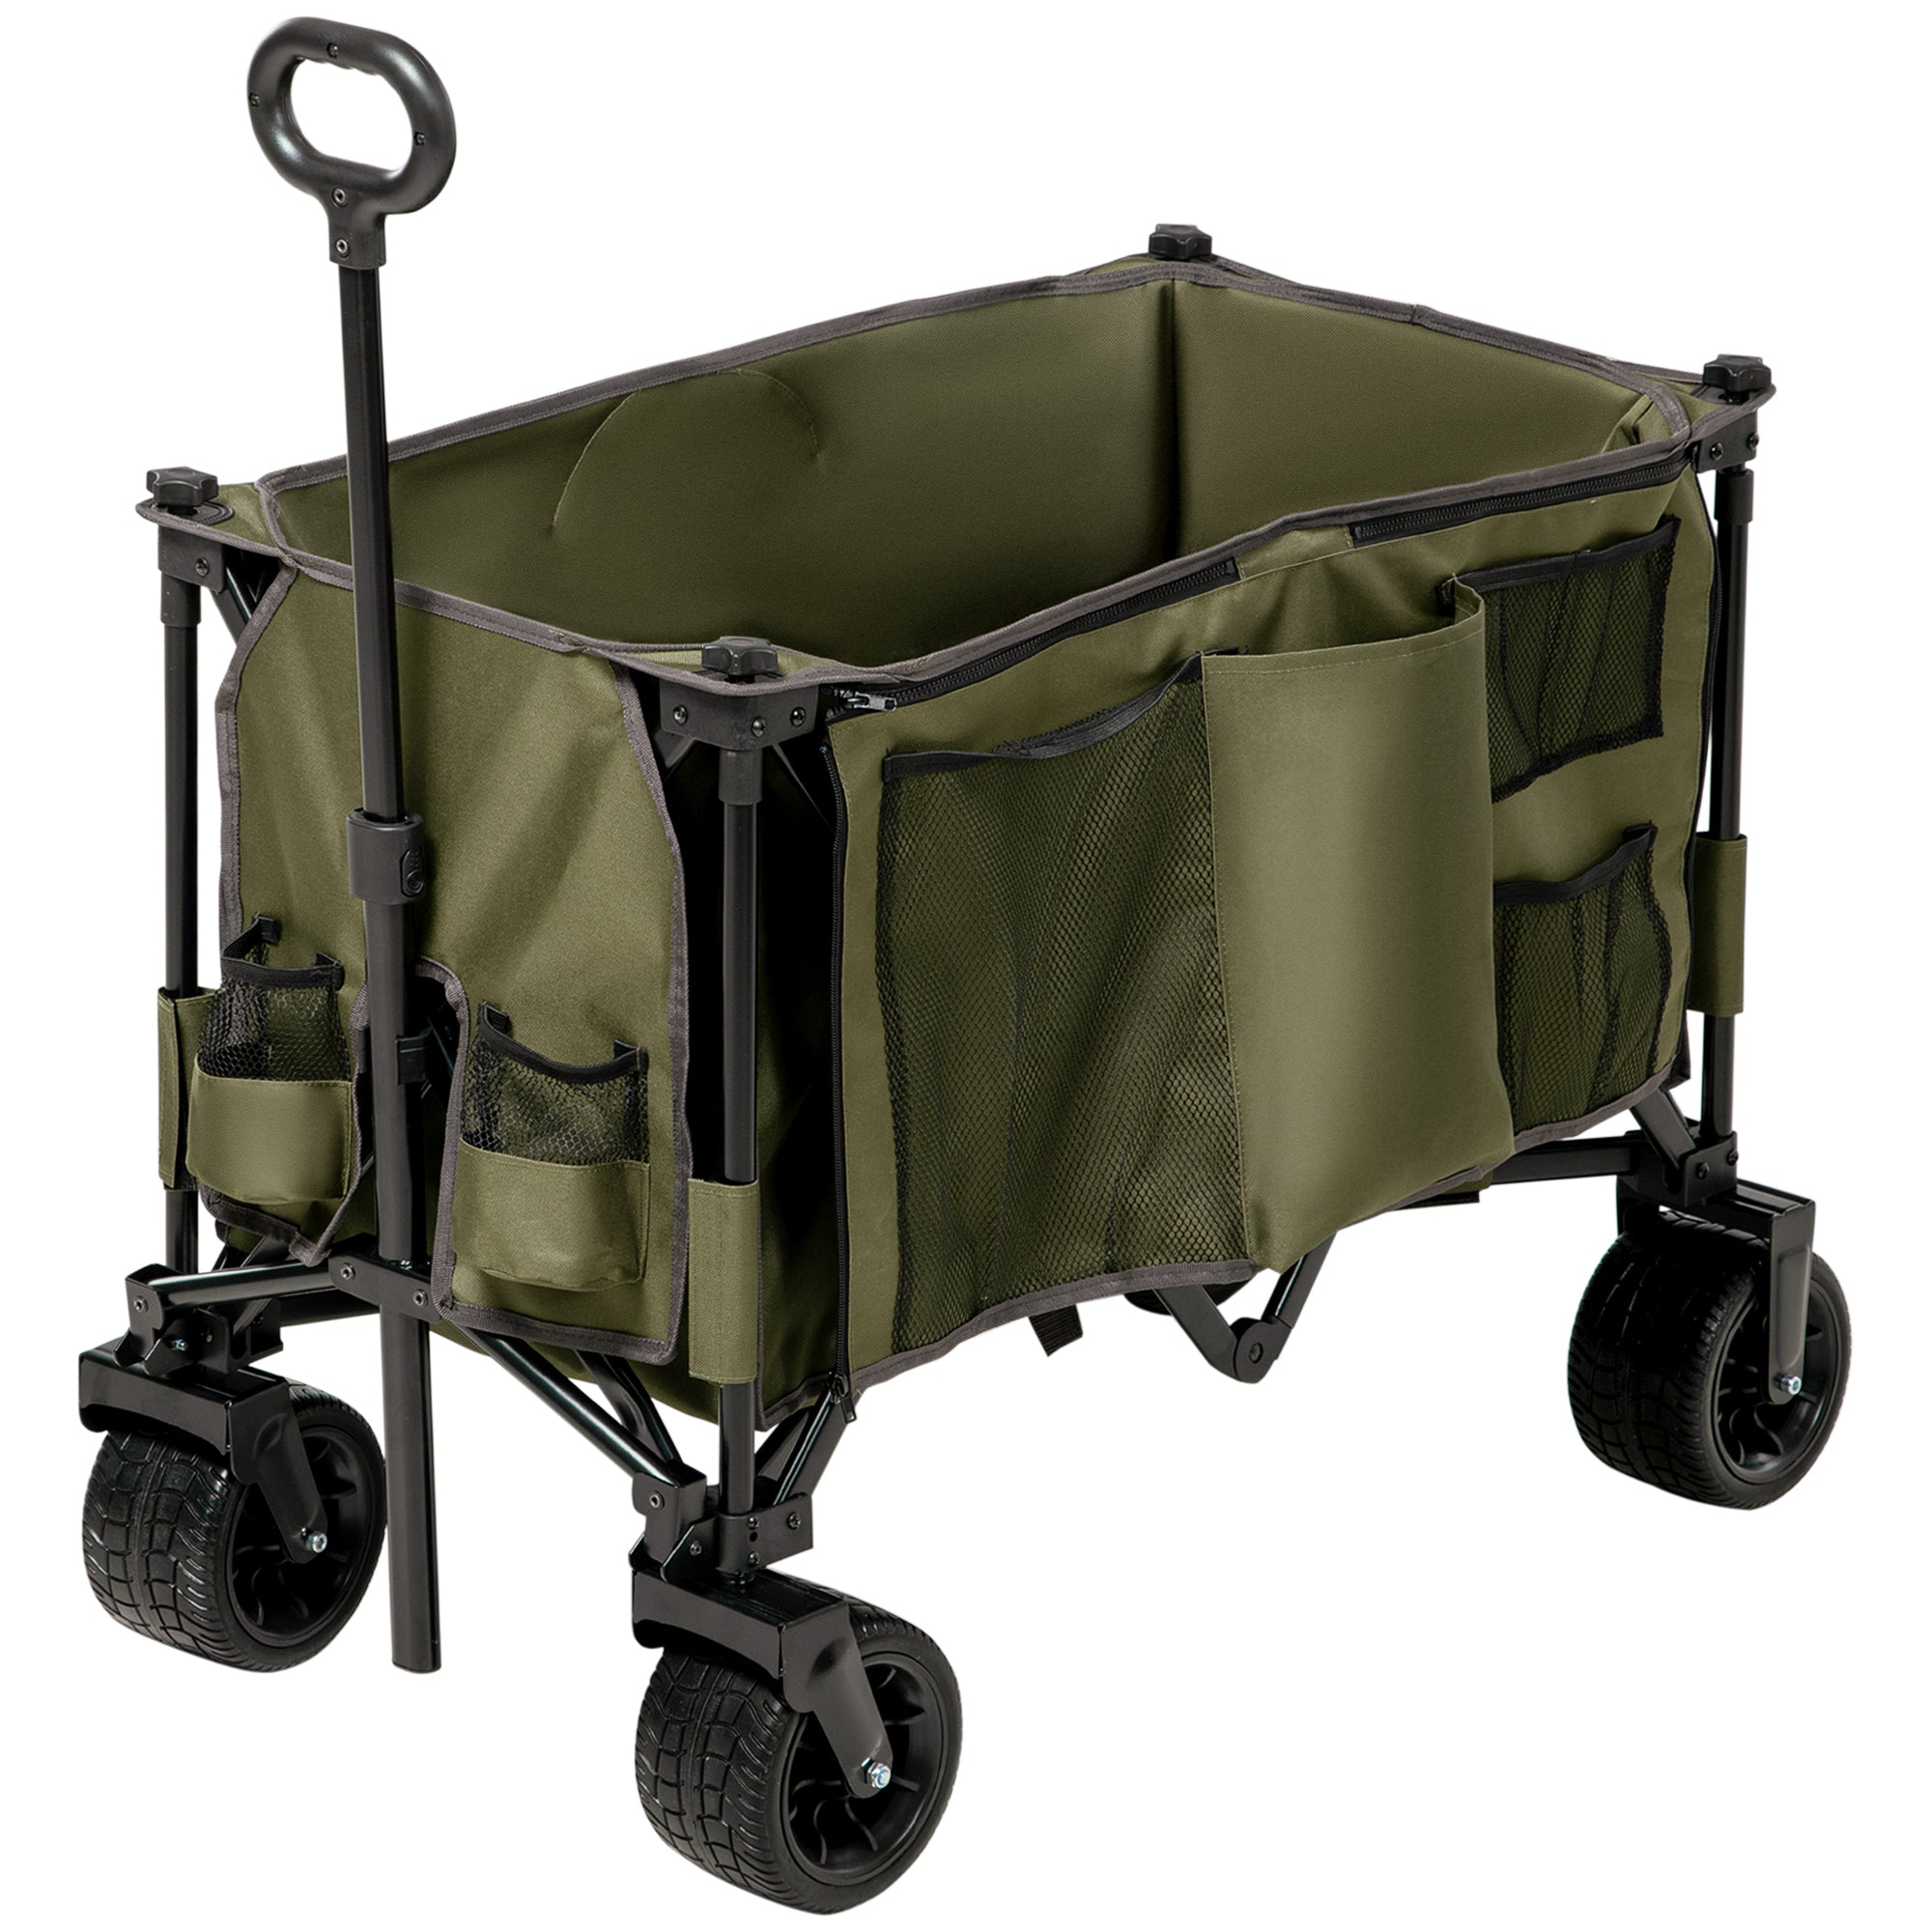 Outsunny Folding Wagon Garten Cart Collapsible Camping Trolley on Wheels - Green  | TJ Hughes